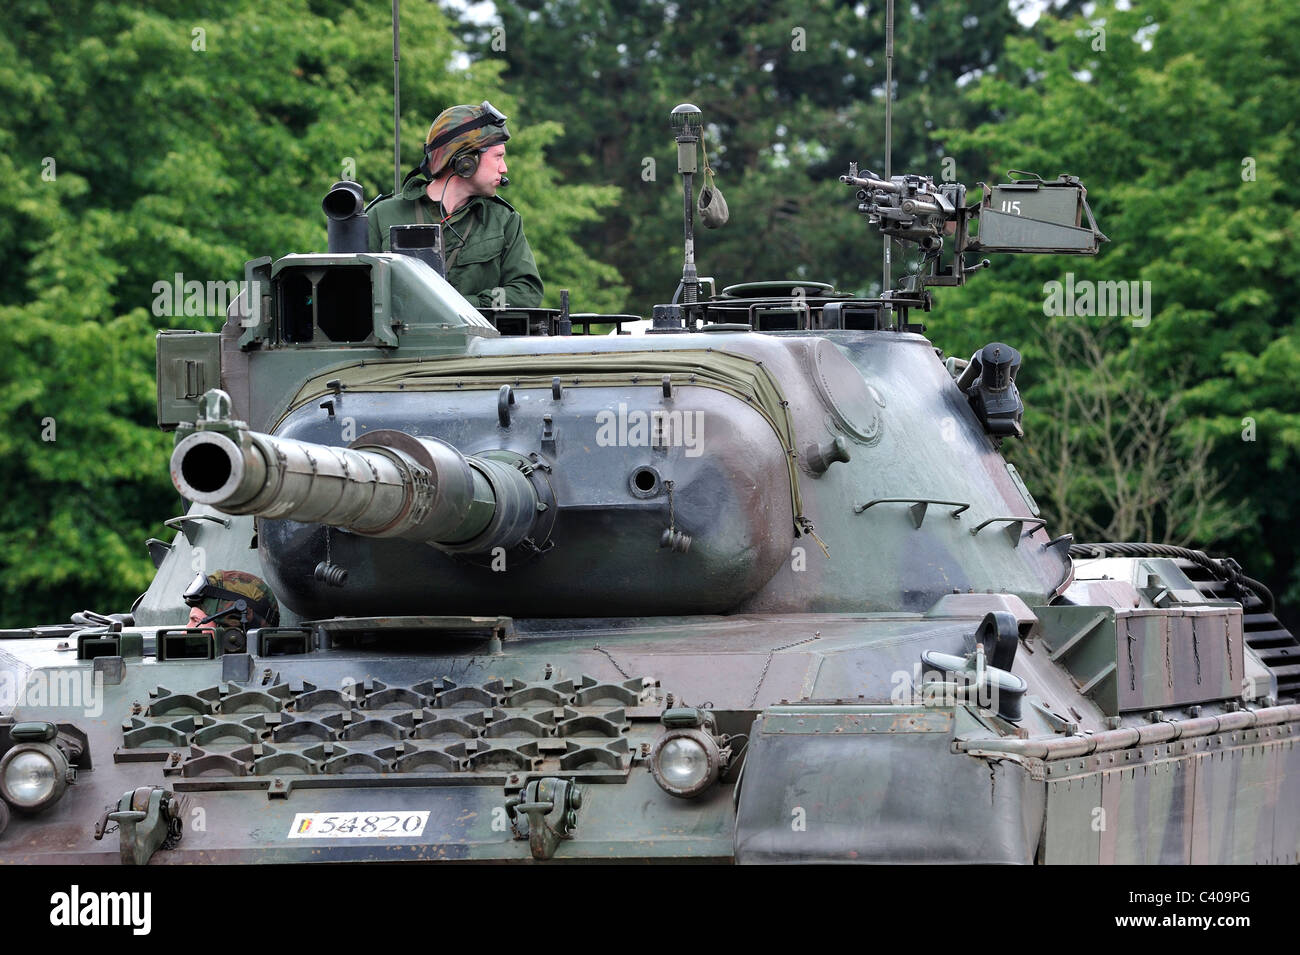 Driver and commander in turret of Leopard 1 battle tank of the Belgian army, Belgium Stock Photo